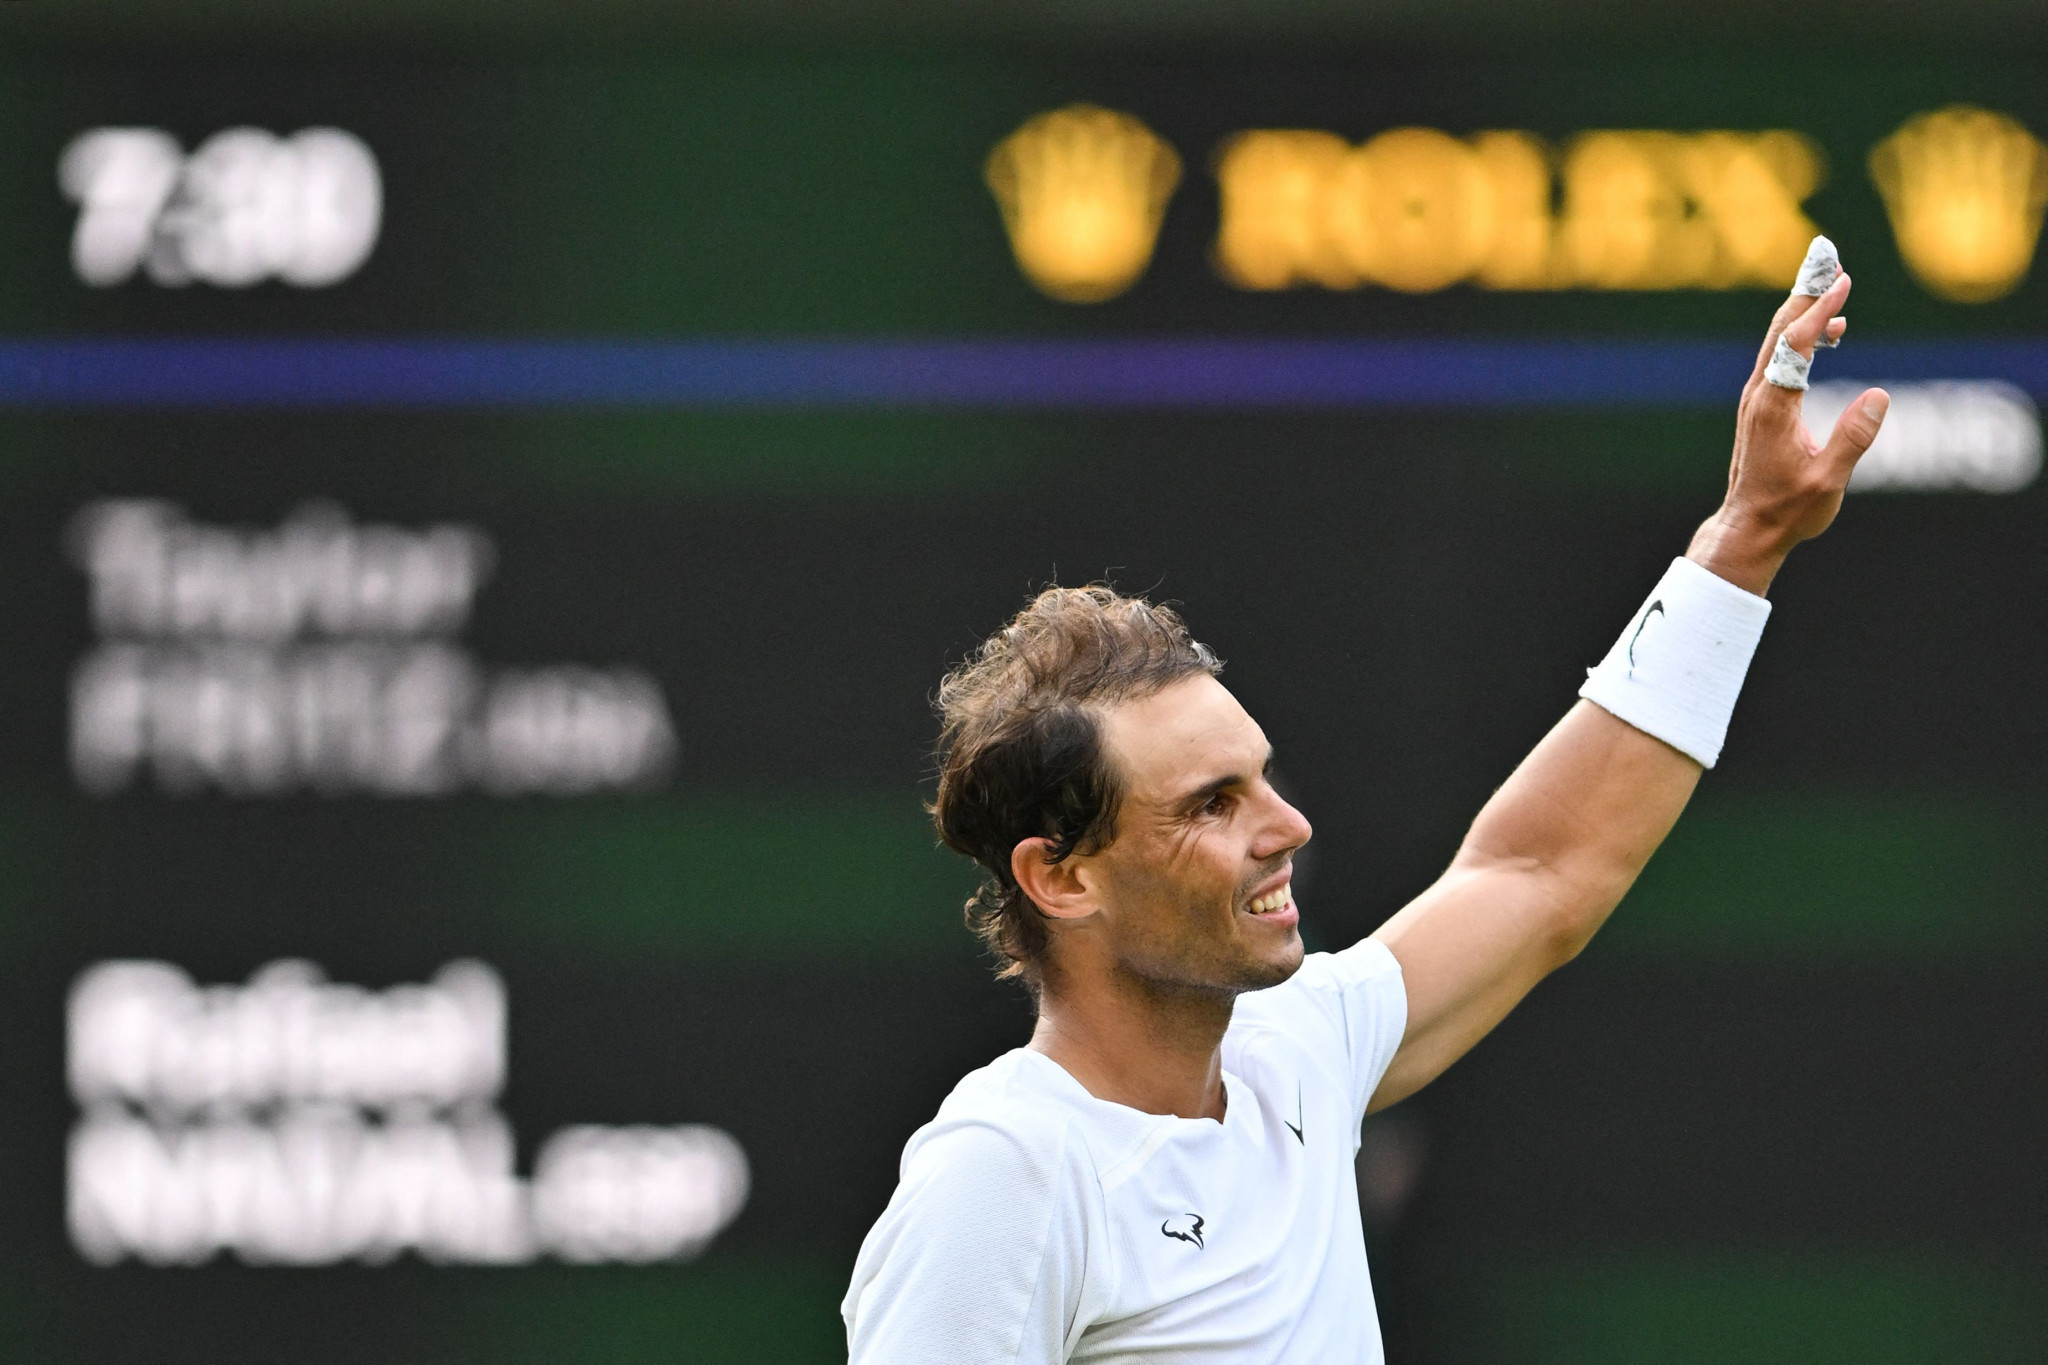 Nadal squeaks through to semi-finals in tiebreaker with Fritz at Wimbledon